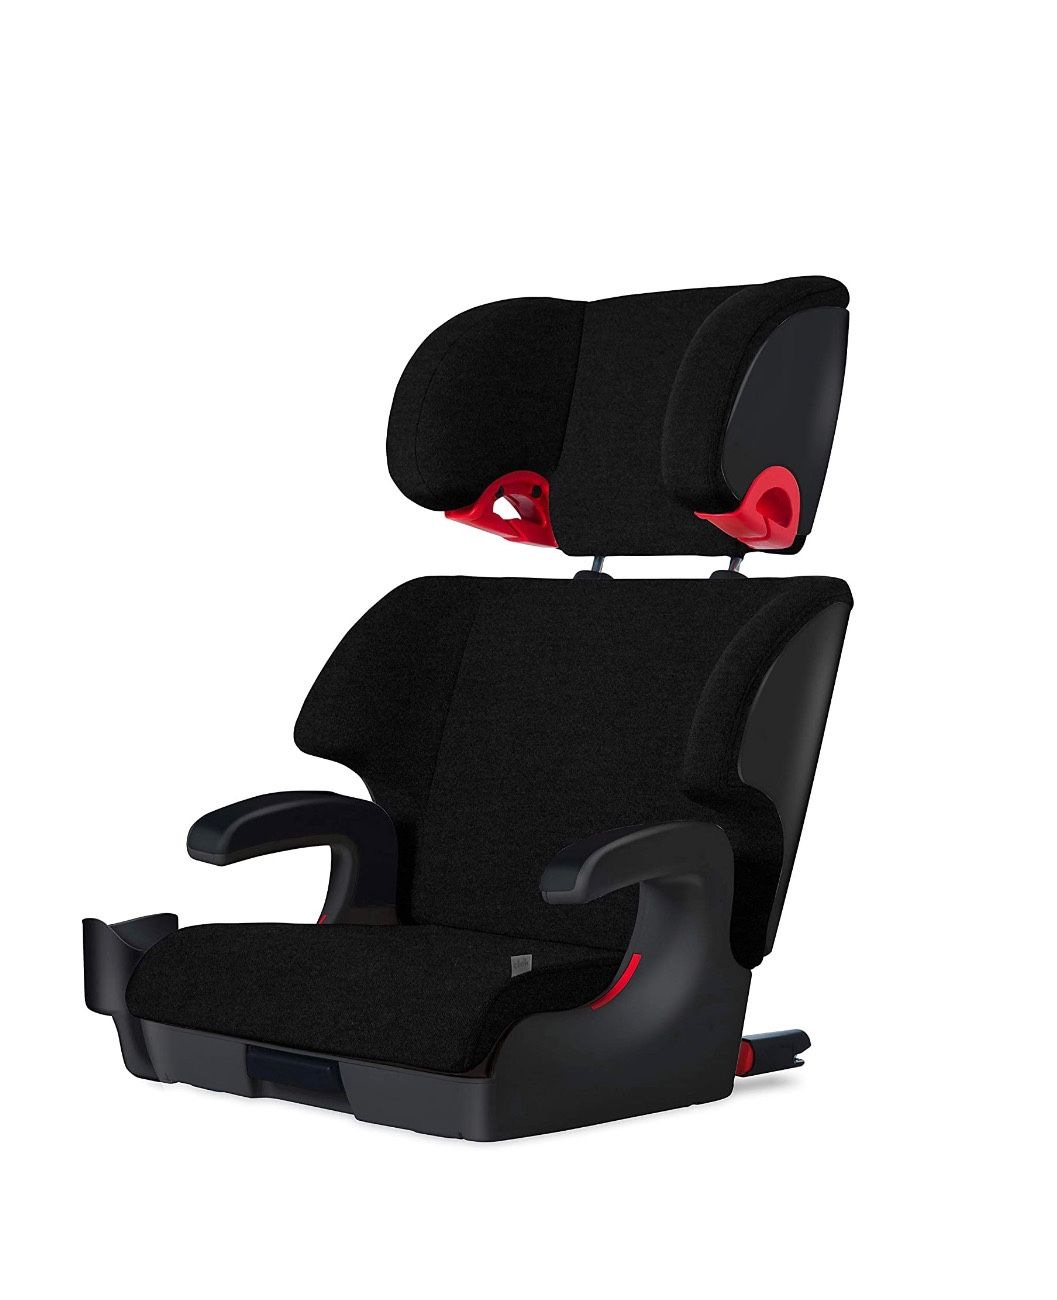 New High Back Booster Seat